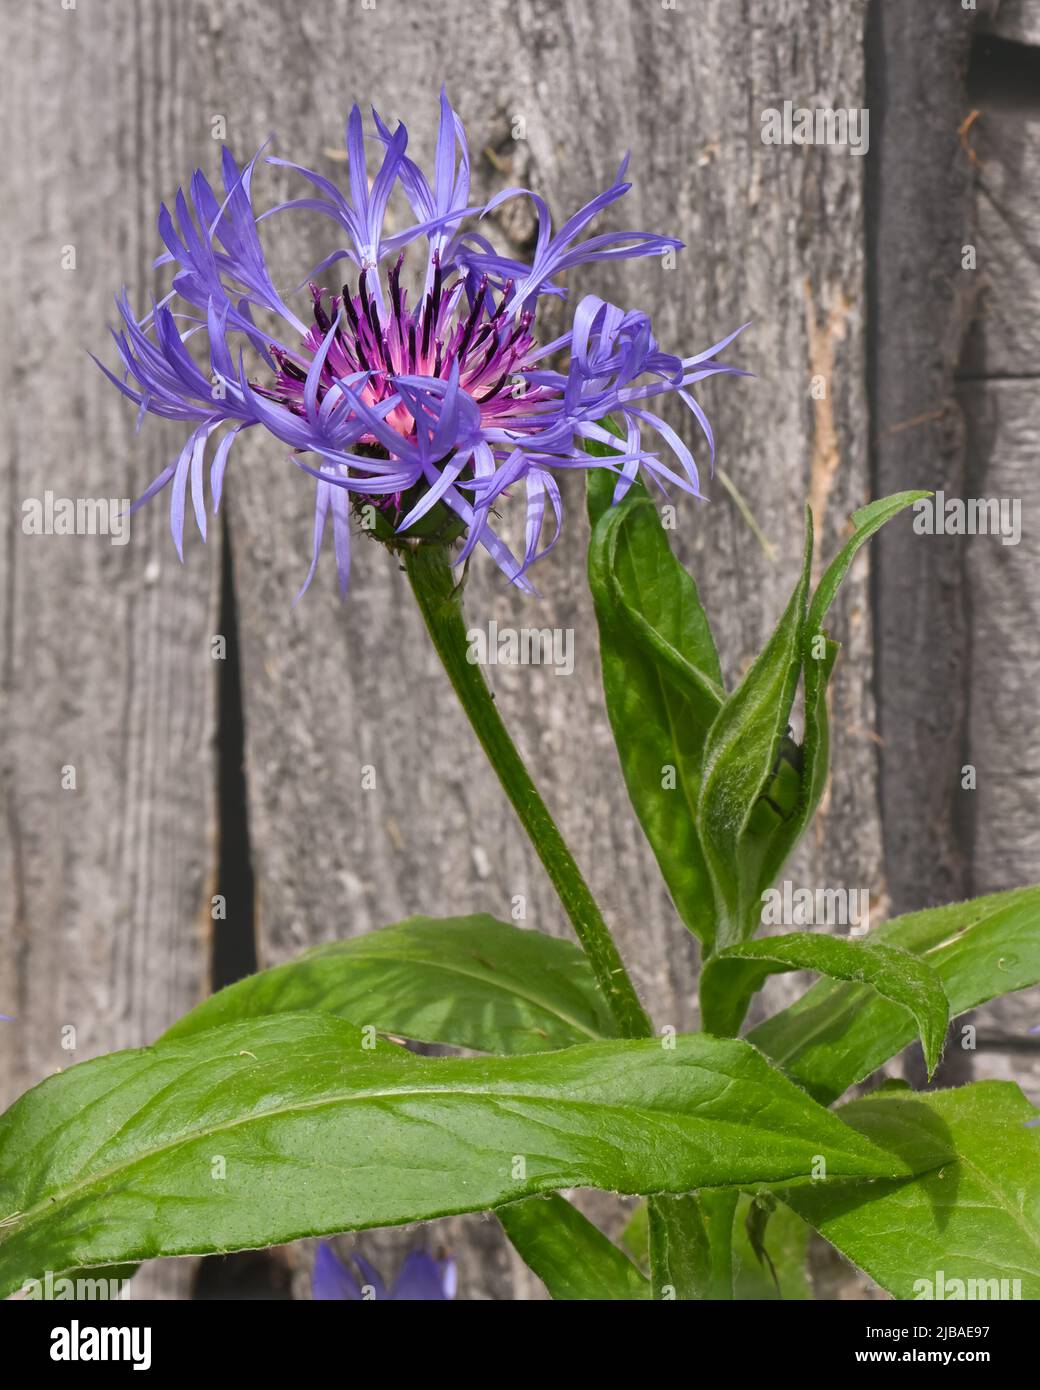 Blooming Mountain bluet (a.k.a. Bachelor’s button, Centaurea montana) against rustic wood background. Stock Photo